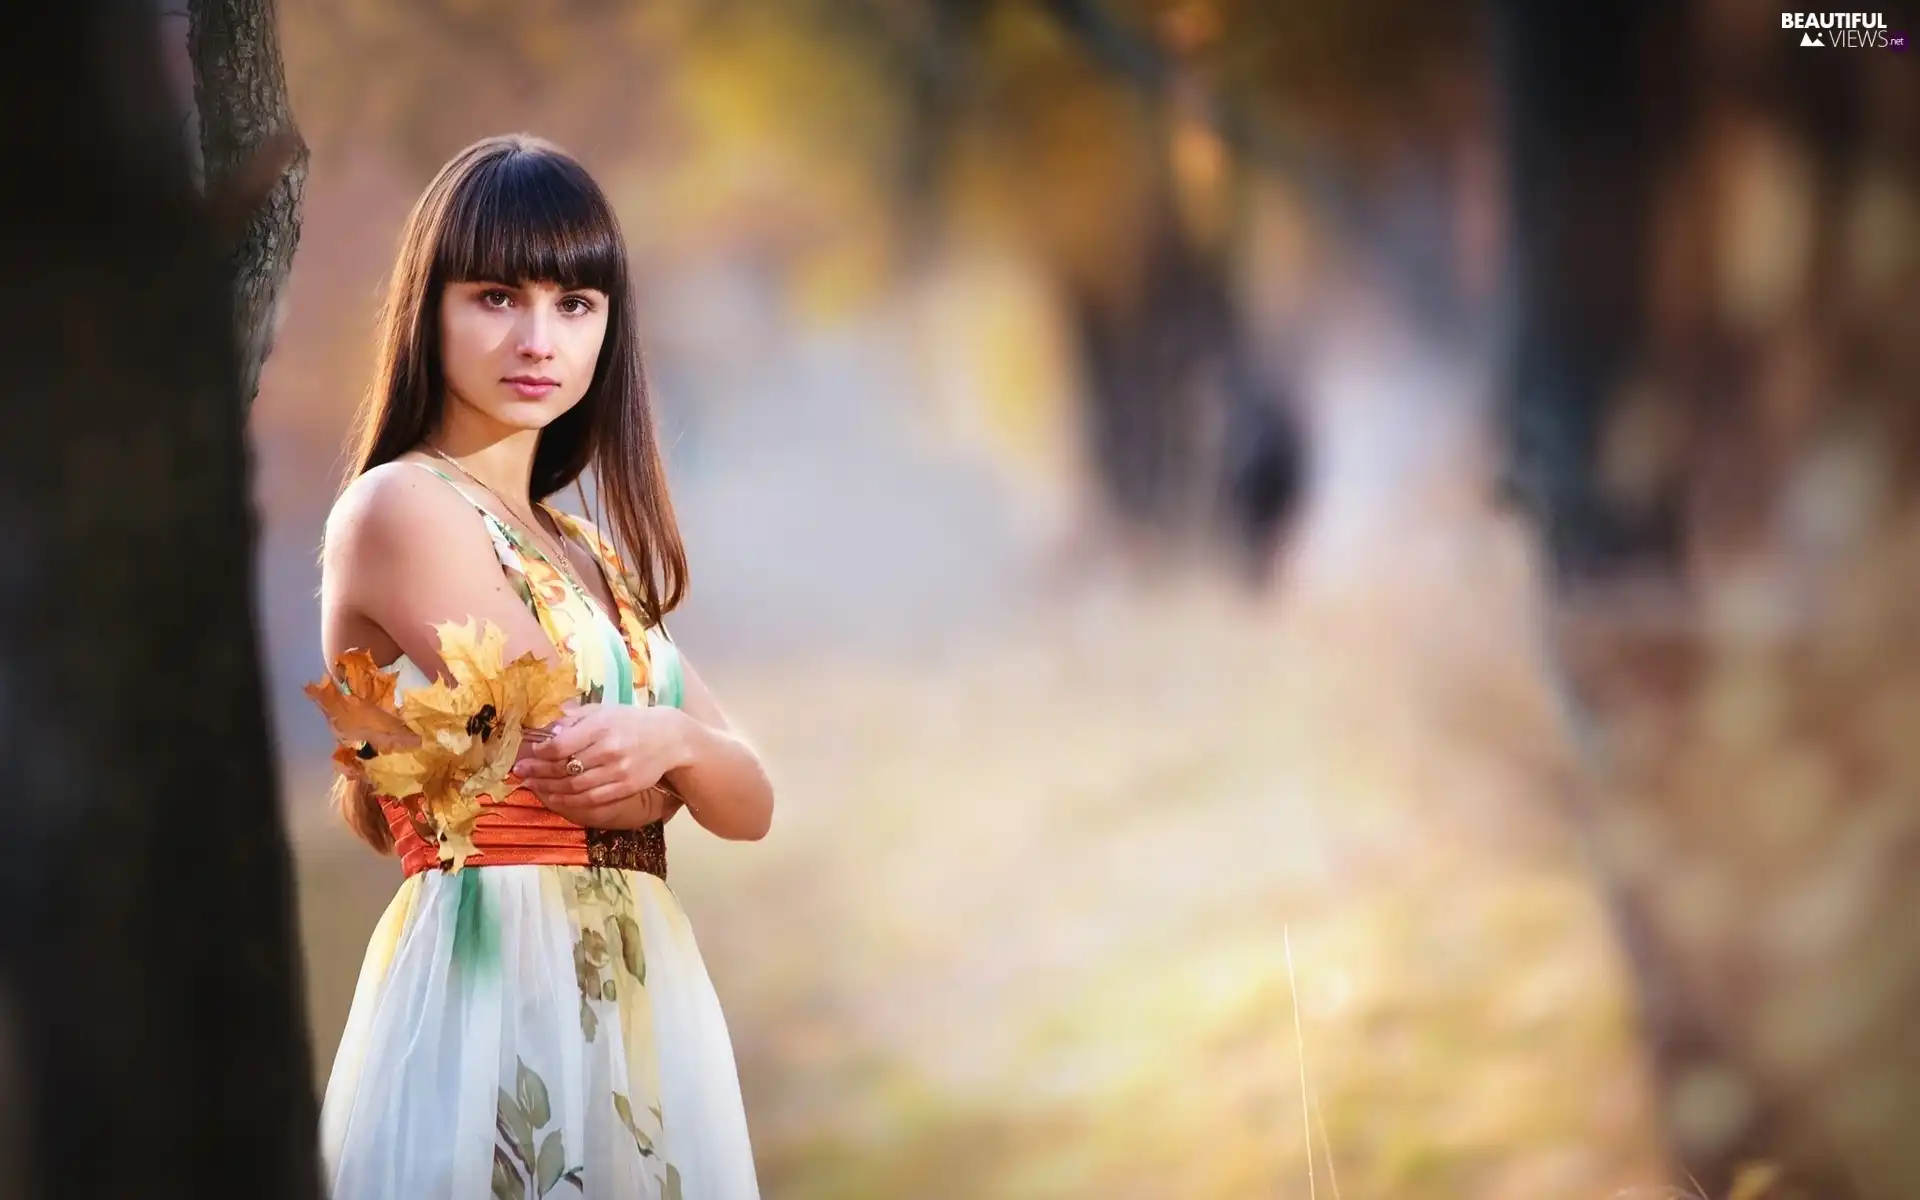 viewes, forest, Leaves, trees, girl, small bunch, autumn